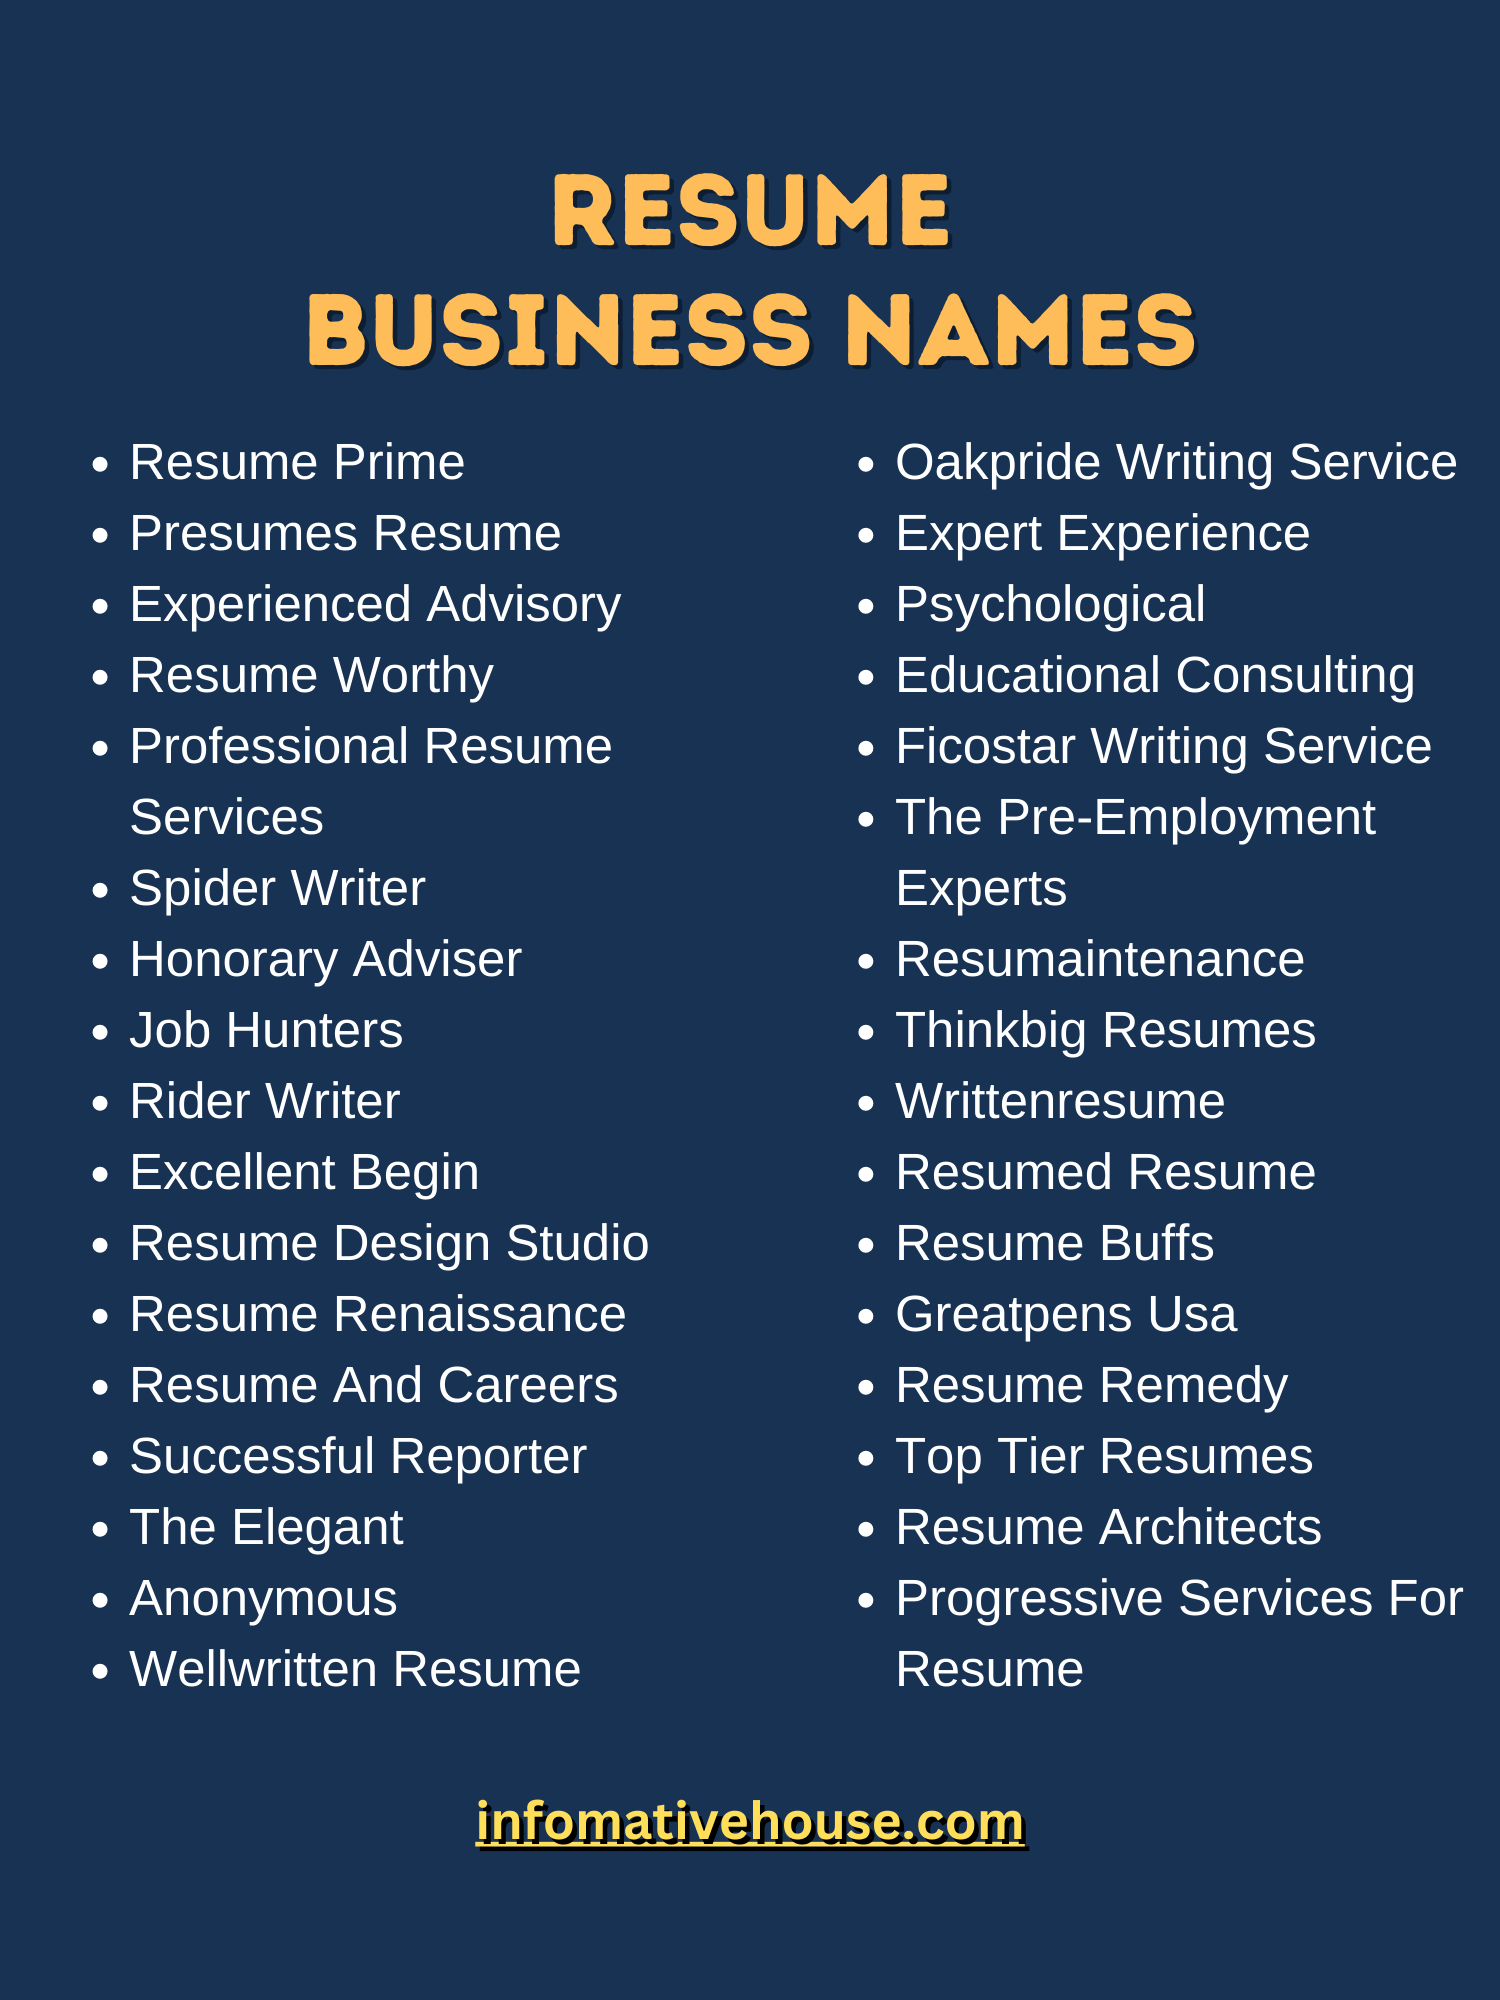 Resume Business Names